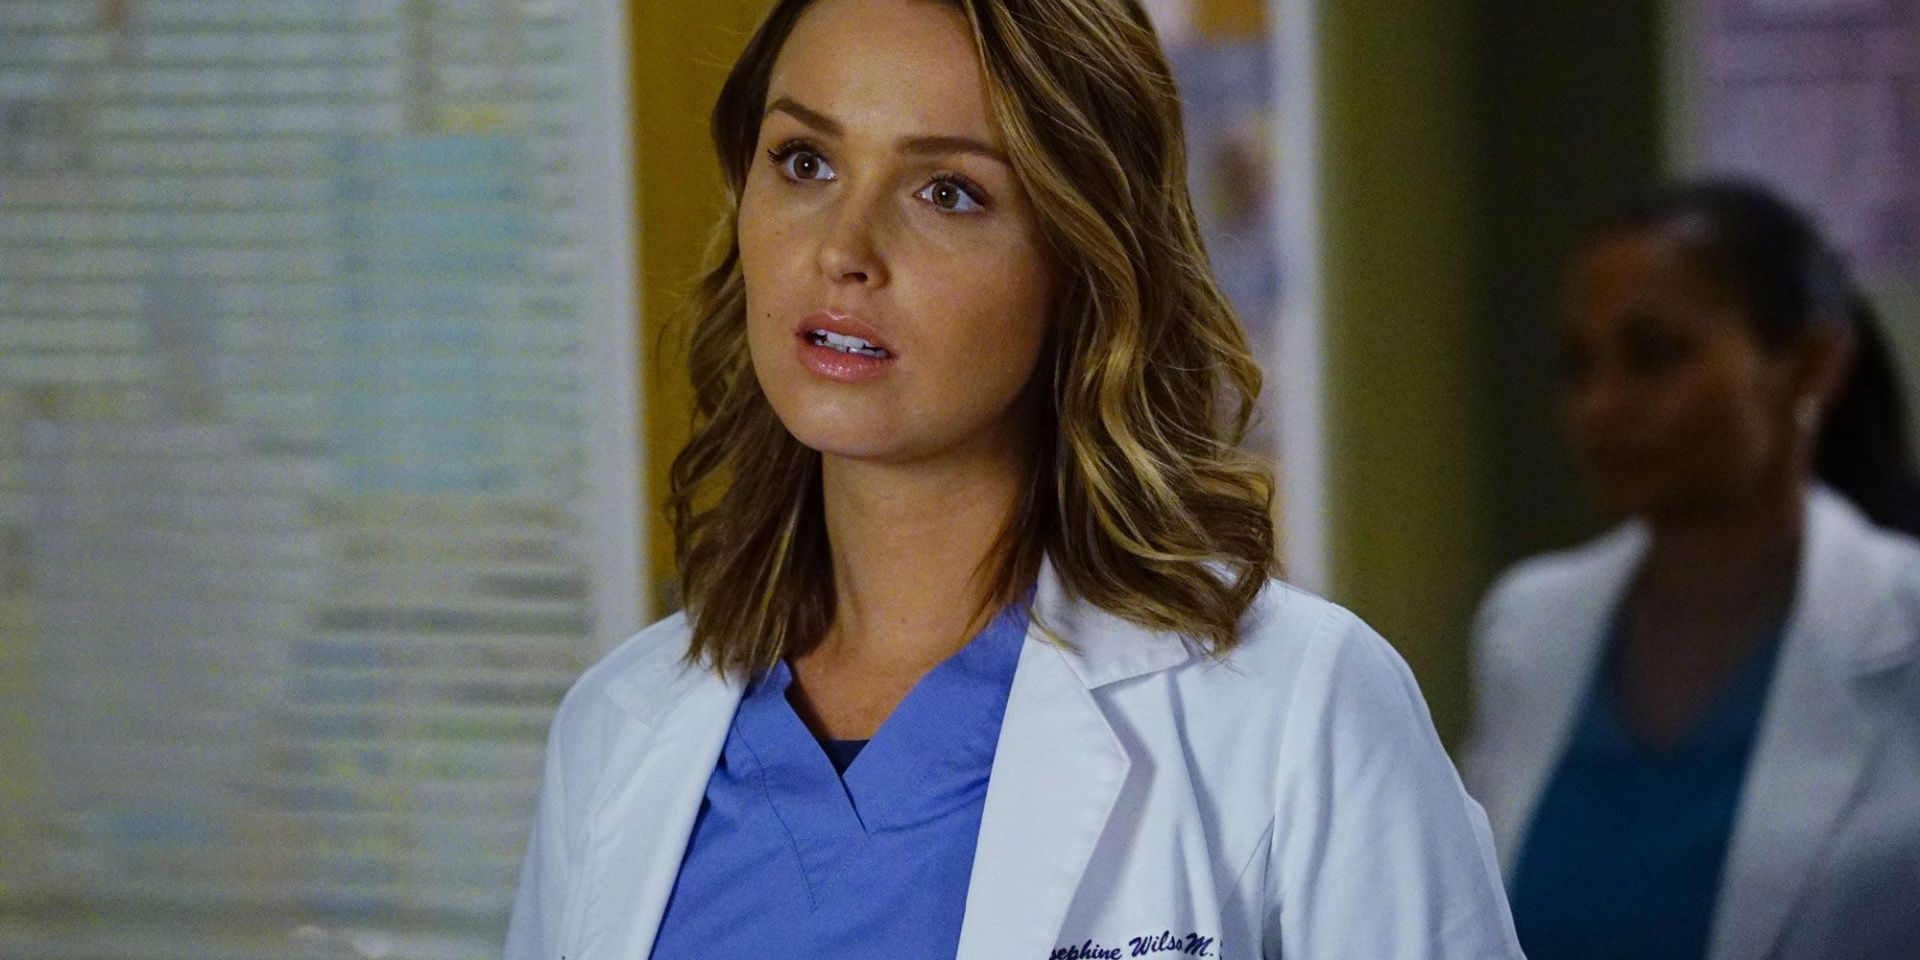 Greys Anatomy 5 Actors Who Nailed Their Roles (& 5 Who Fell Short)